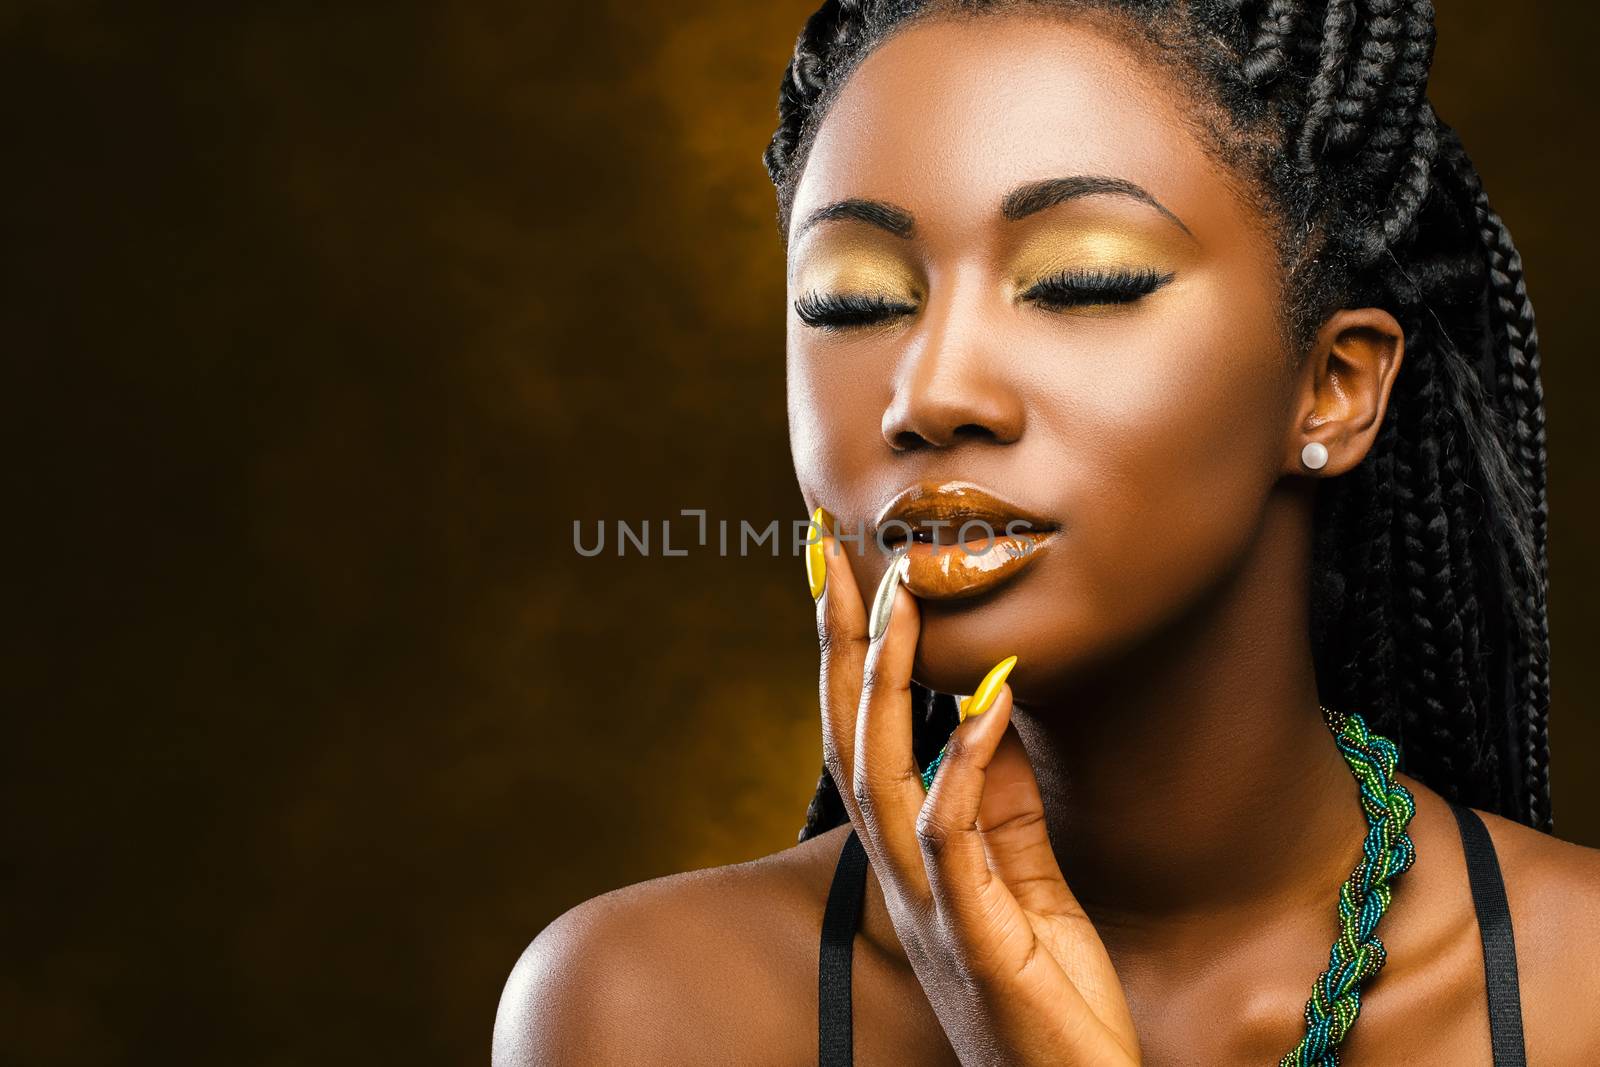 Close up studio portrait of attractive young african woman with long braided hair.Girl with eyes closed touching face with hand.